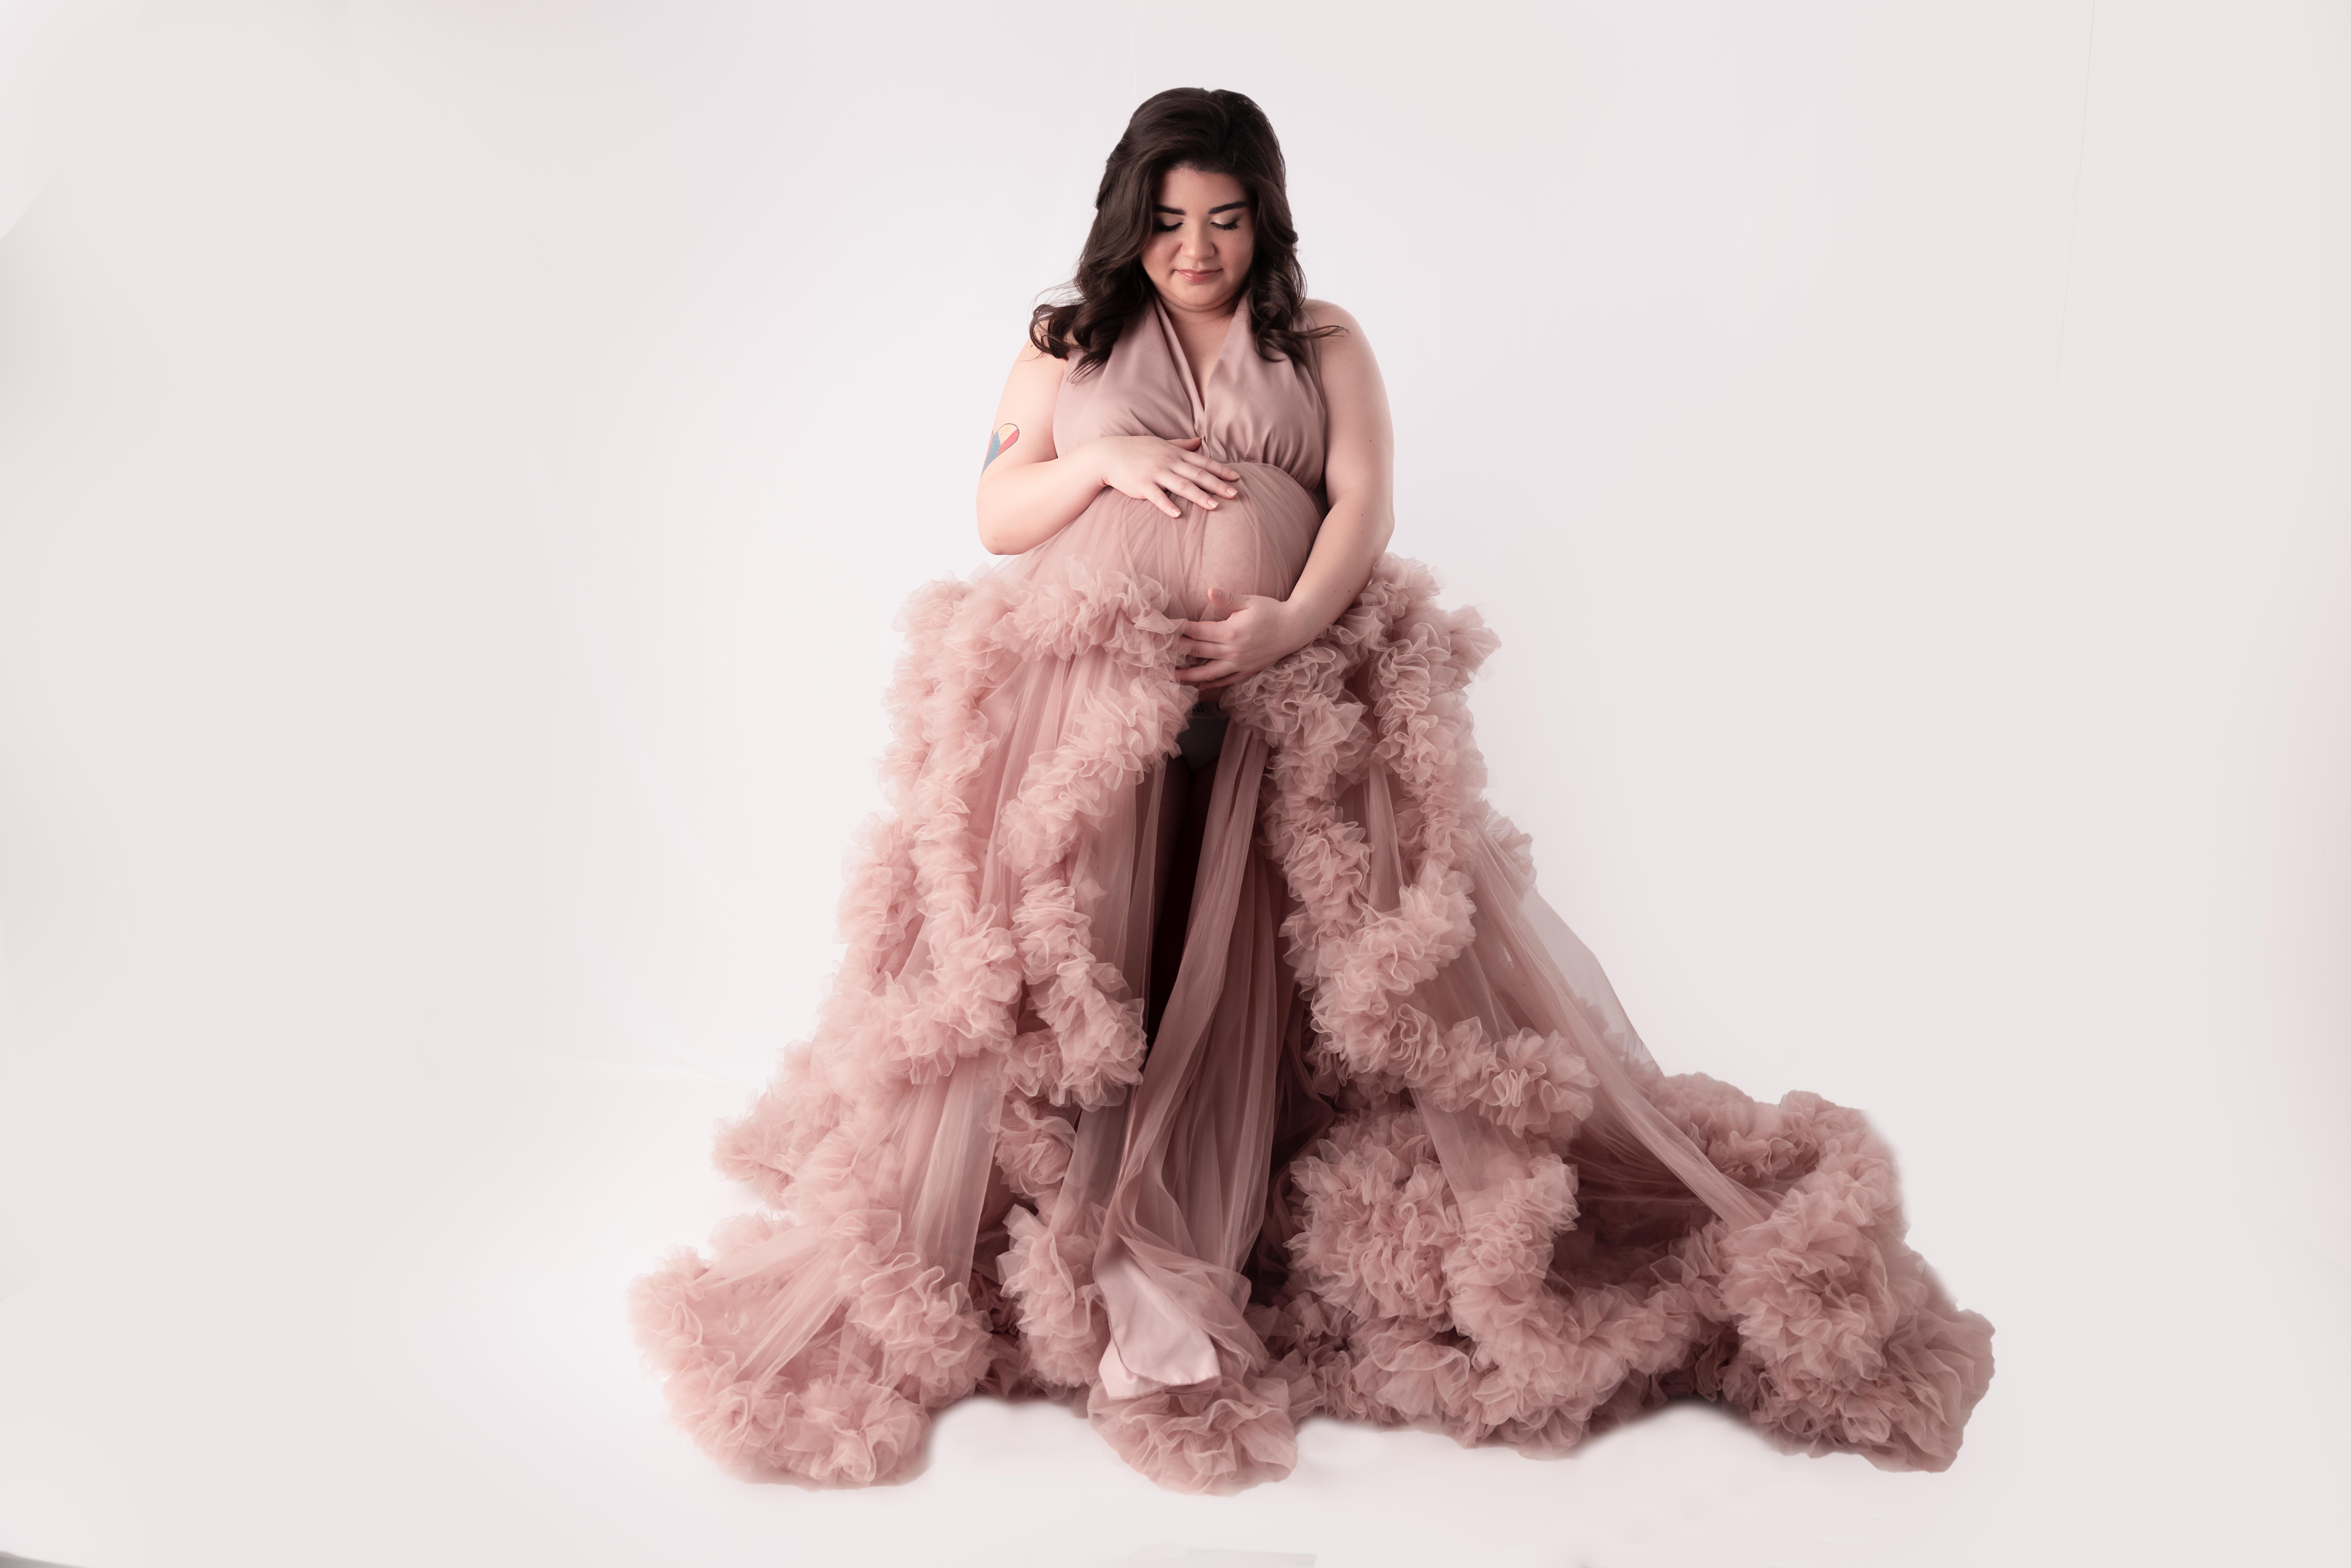 Woman wearing a beautiful pink maternity gown holding her pregnant bare bally